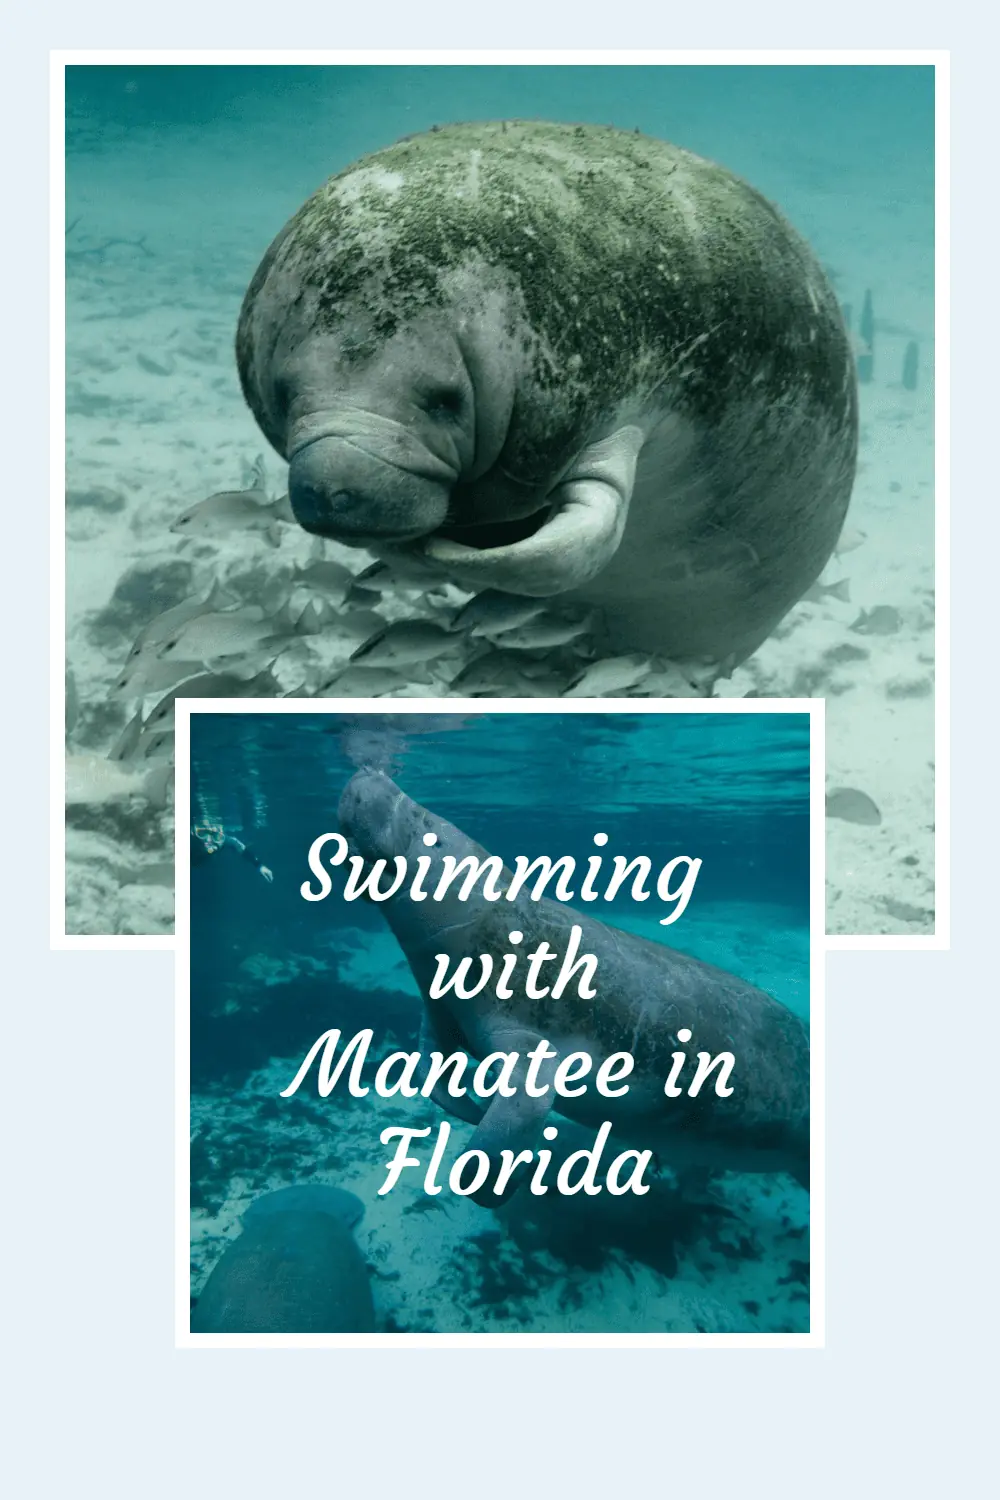 Are you looking for a family-friendly activity in the nature of Florida? Come swim with wild manatees on the Western Coast of Florida. #wildlifeencounter #manatees #Floridathingstodo